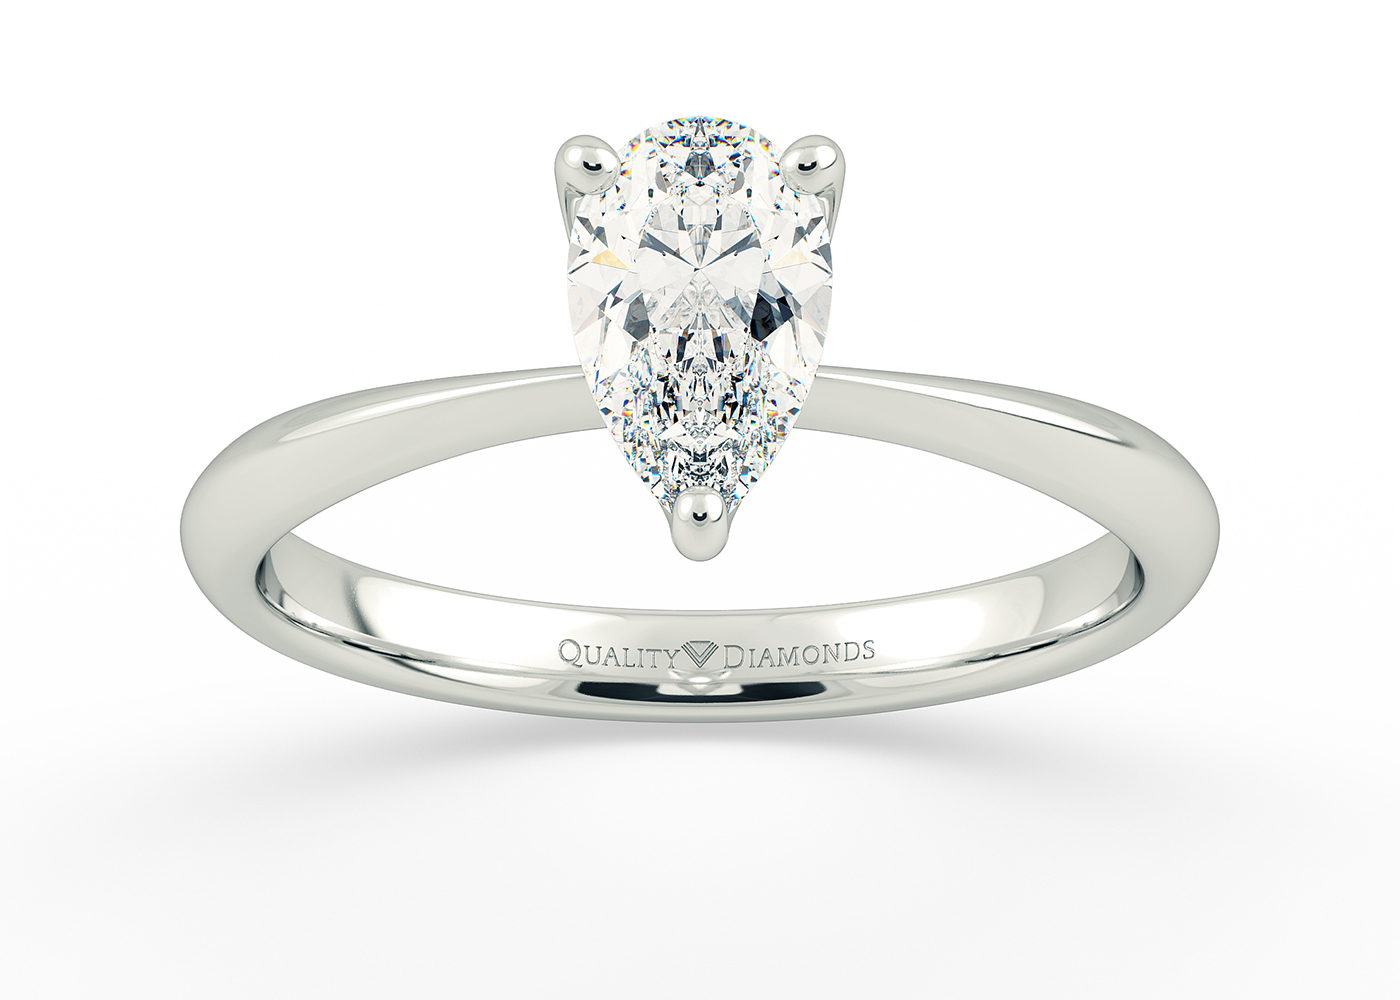 One Carat Pear Solitaire Diamond Engagement Ring in 9K White Gold